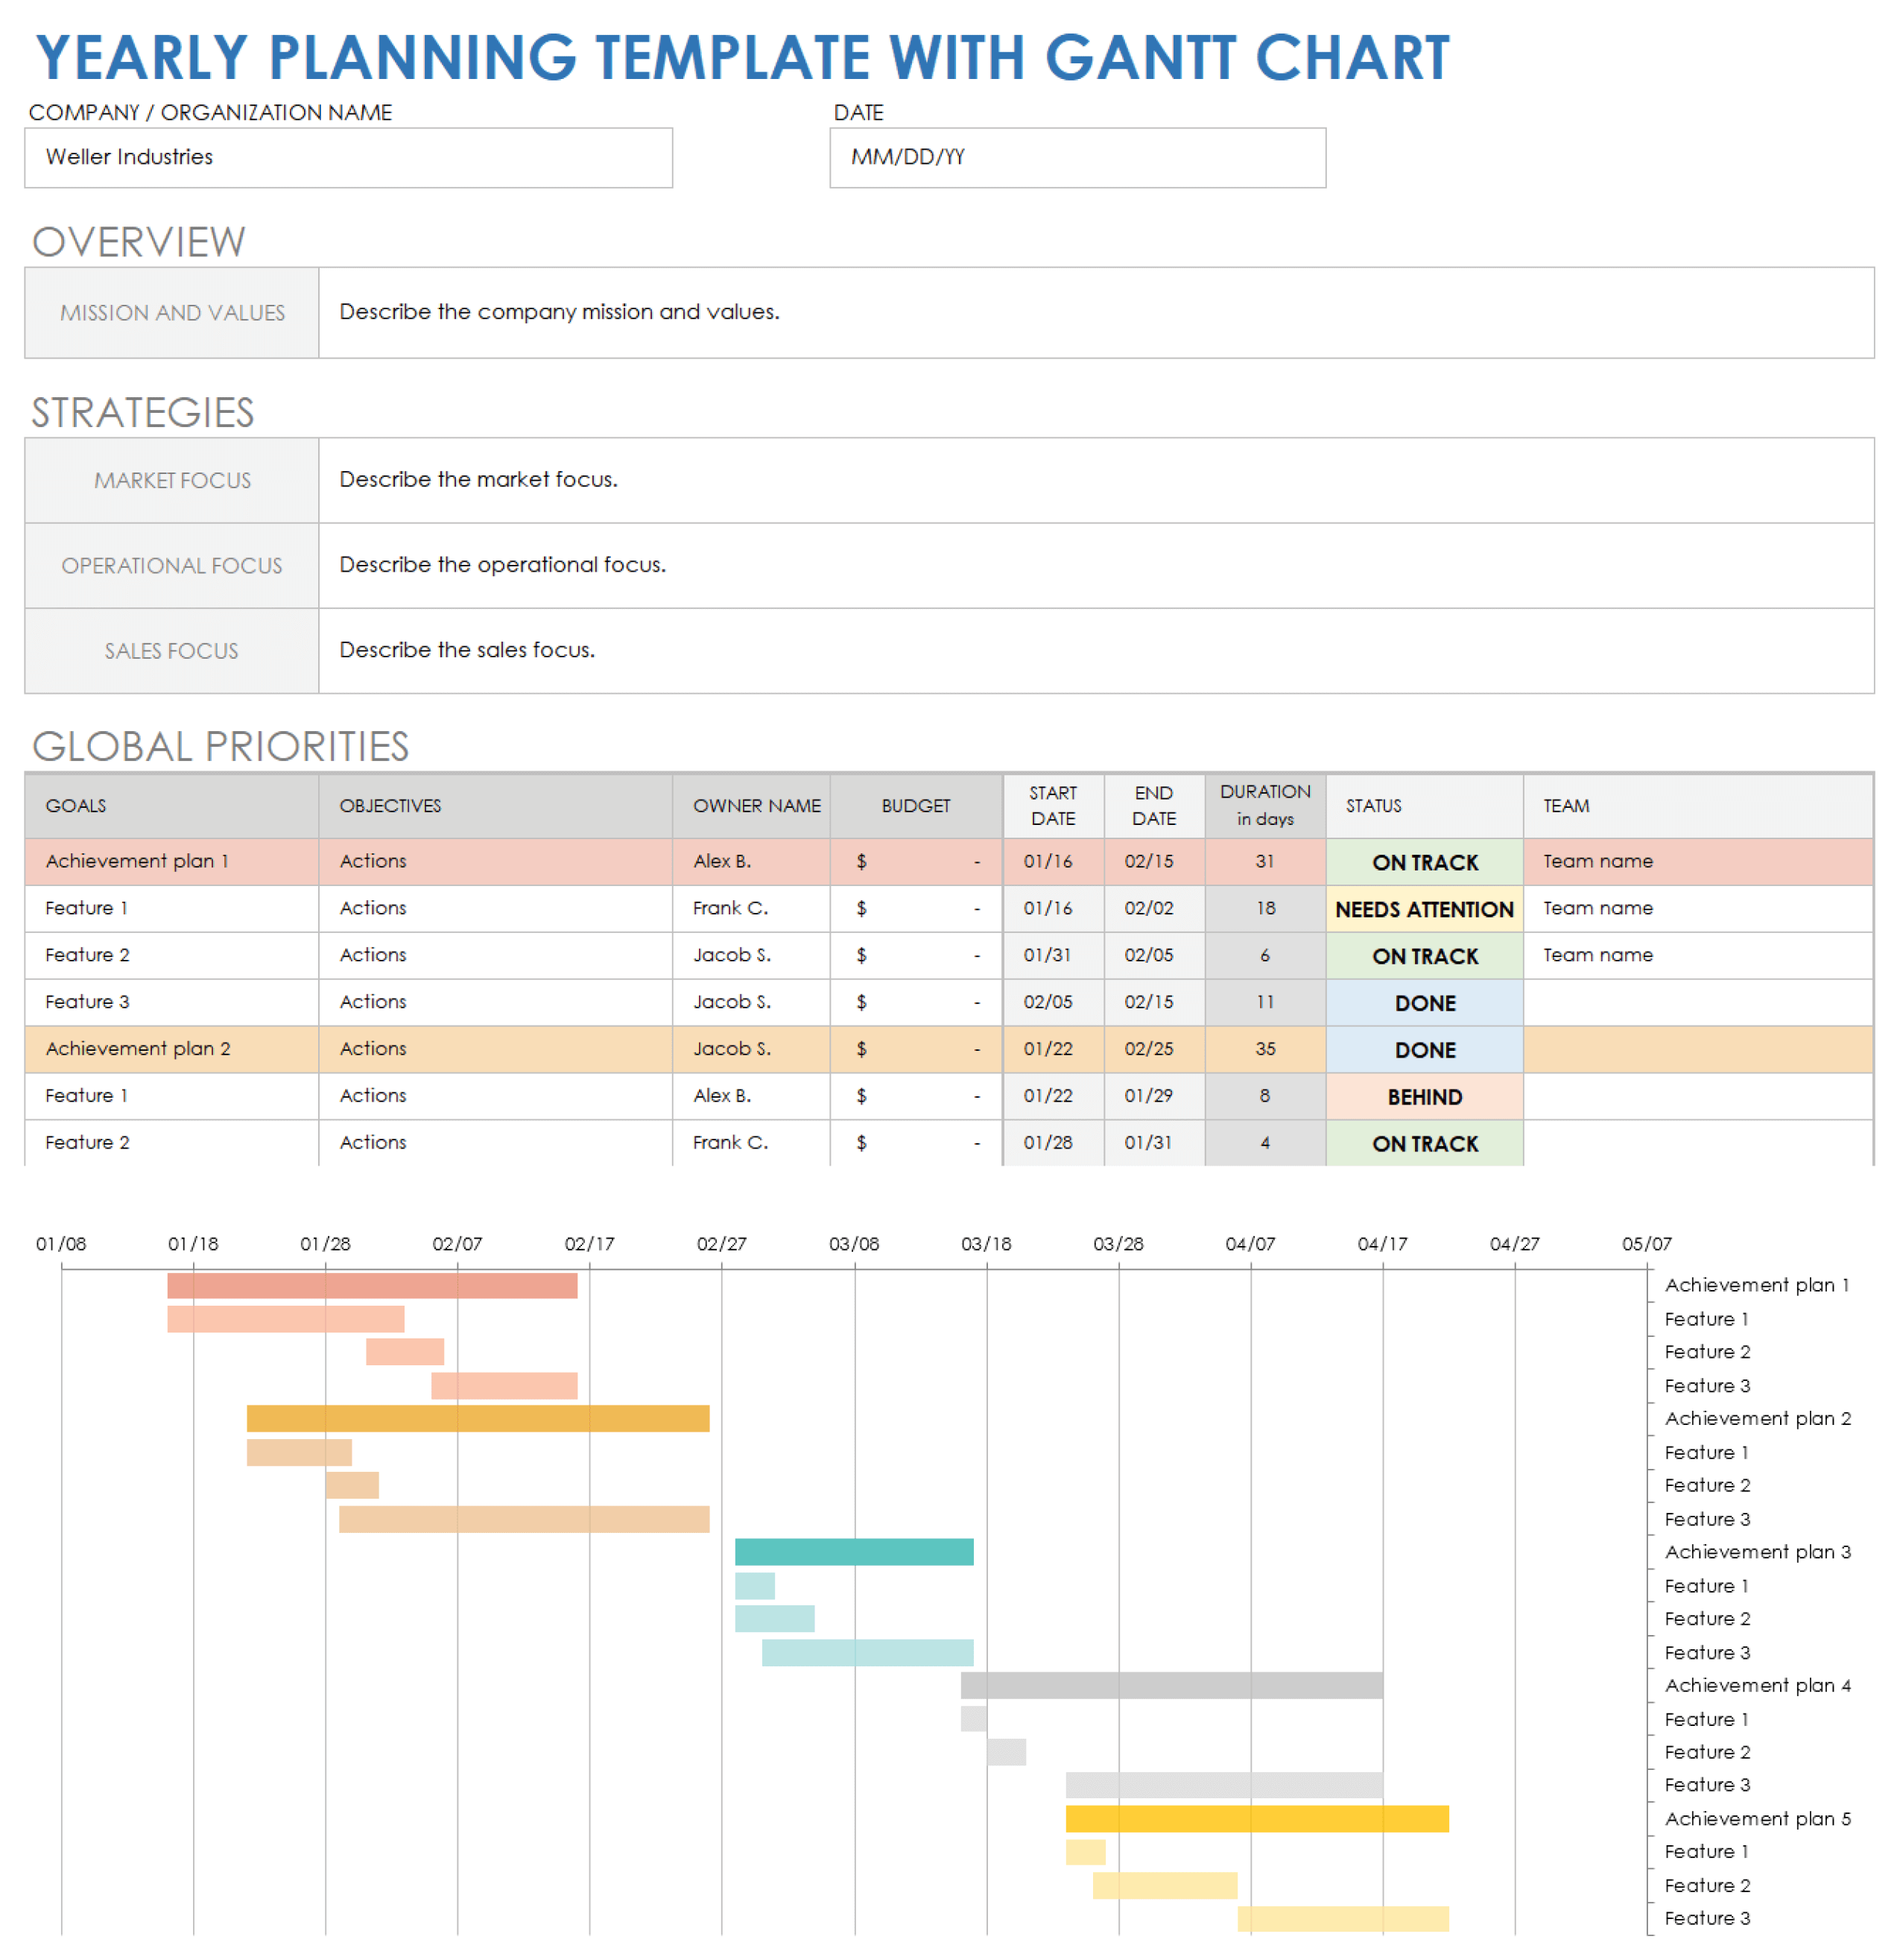 Yearly Planning Template with Gantt Chart